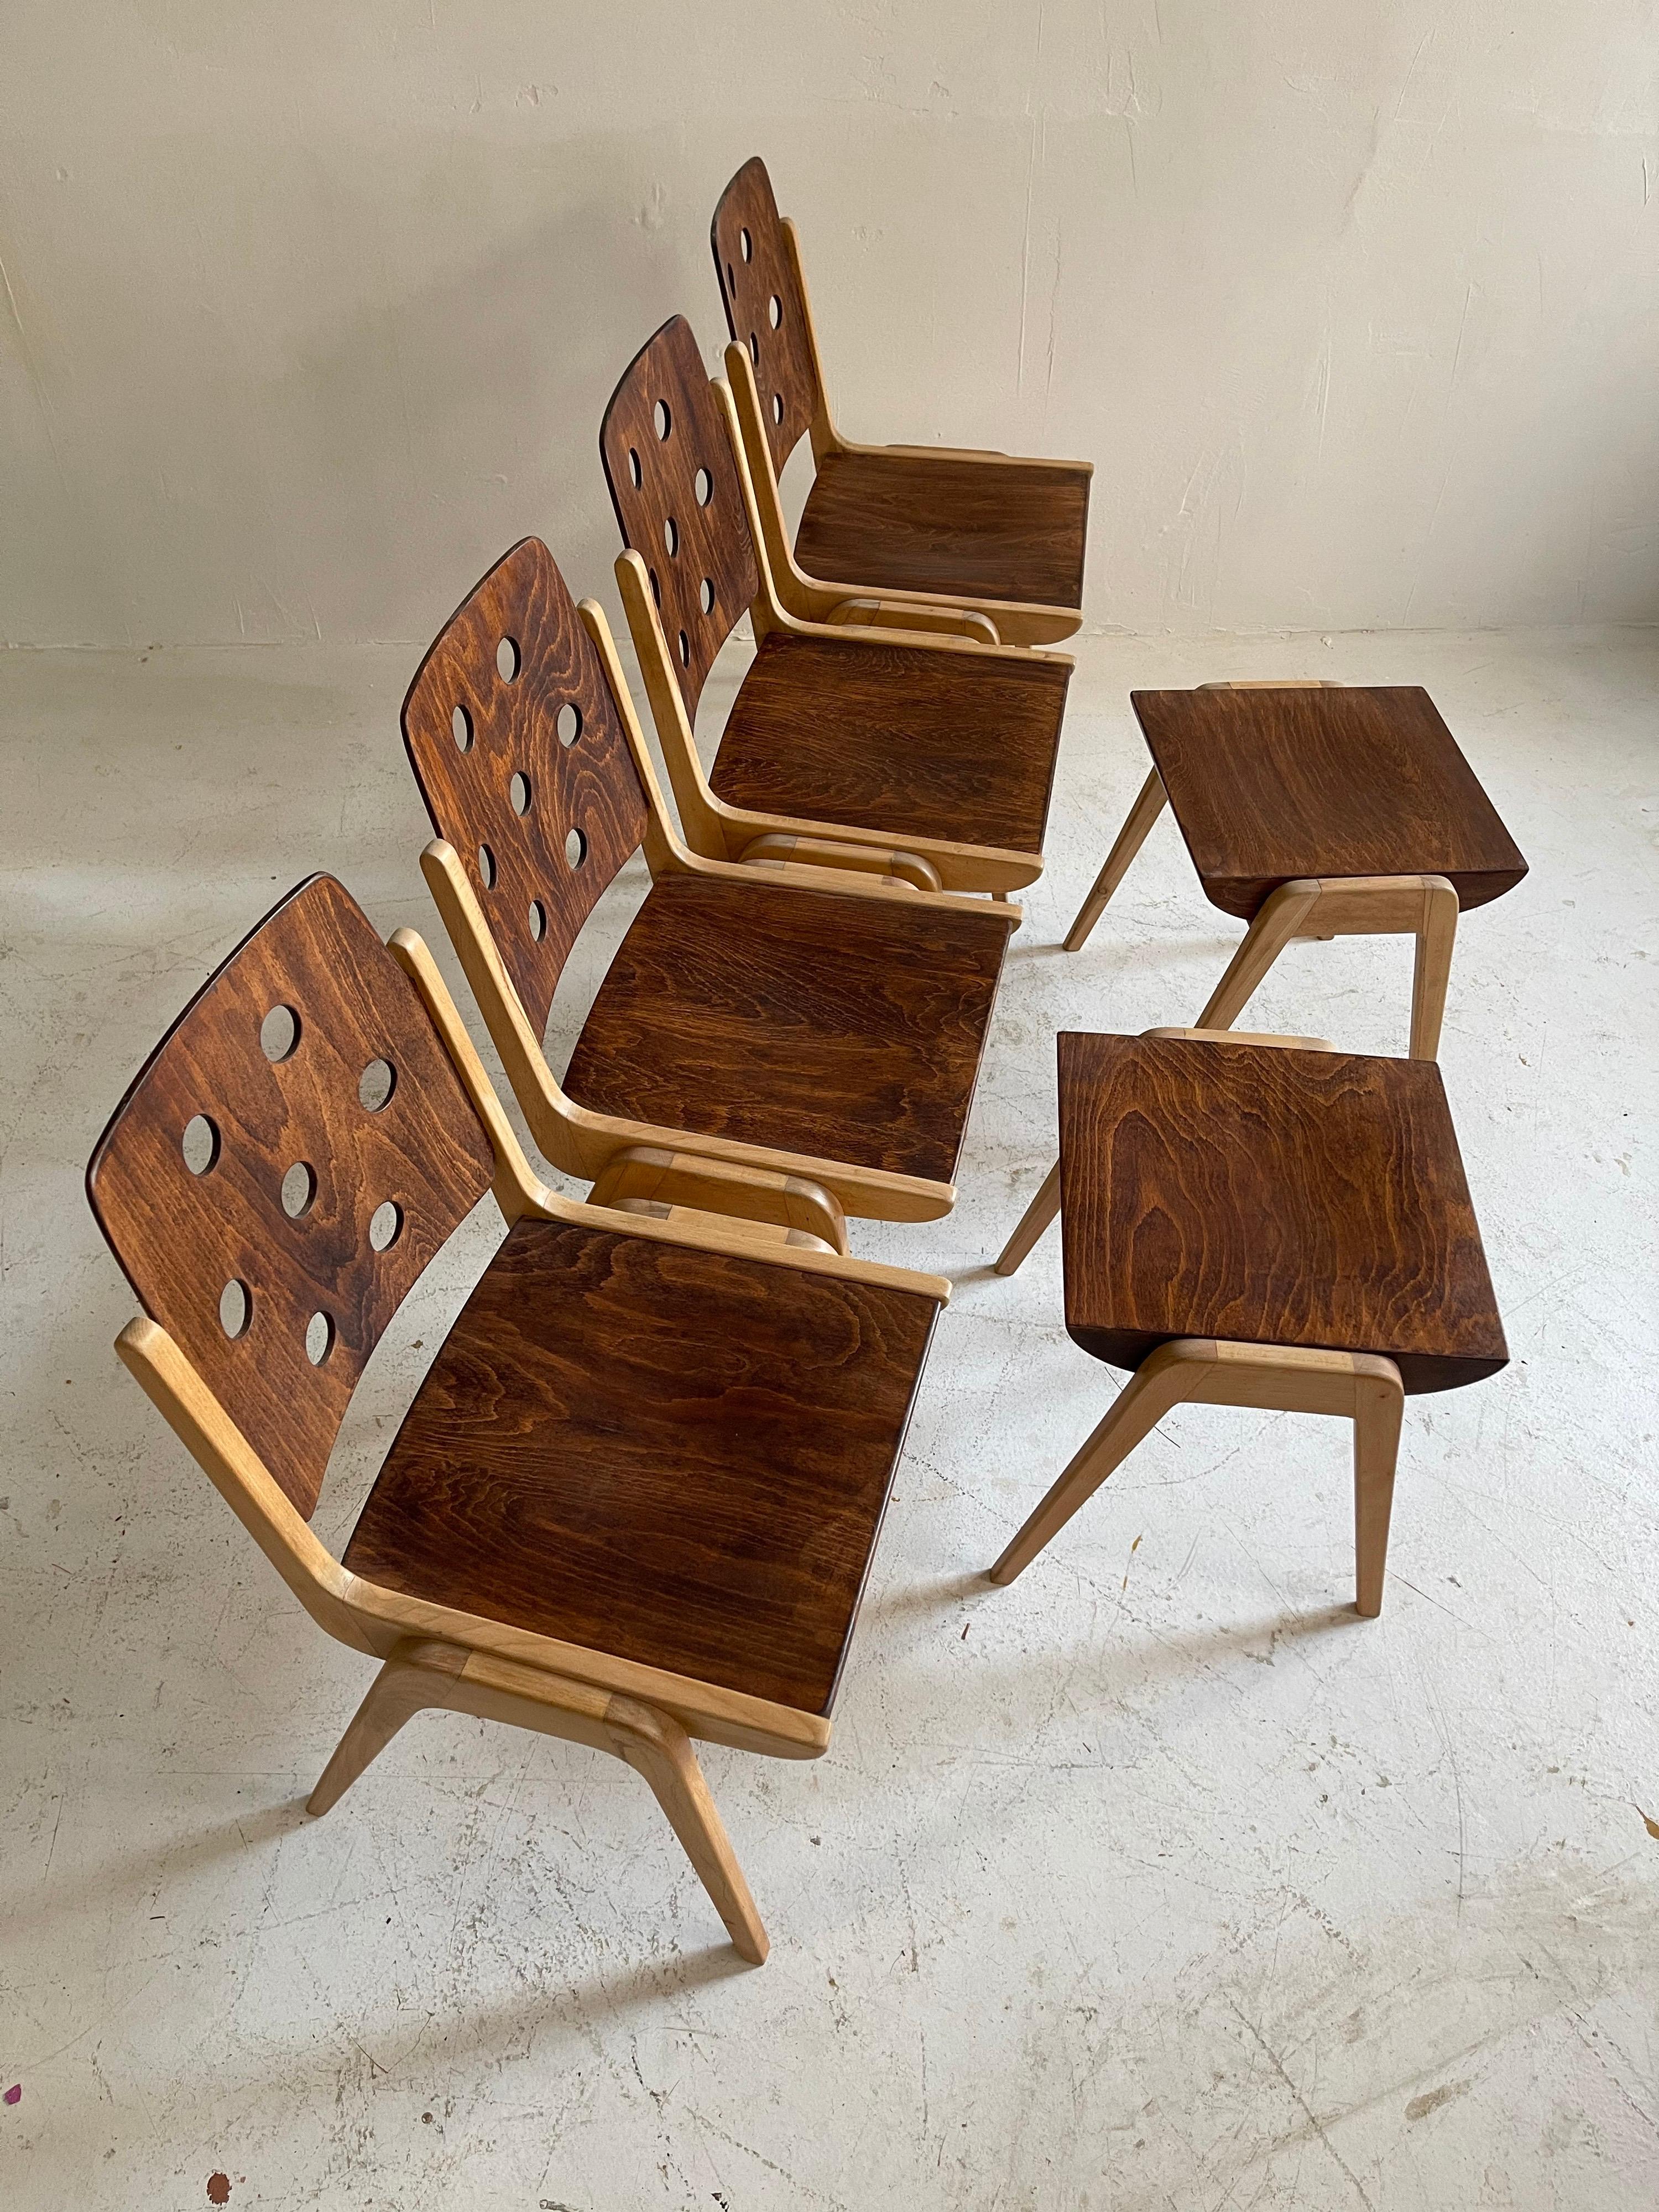 Franz Schuster Model 'Maestro' Dining Room Chairs & Stools, Austria, 1950s For Sale 3